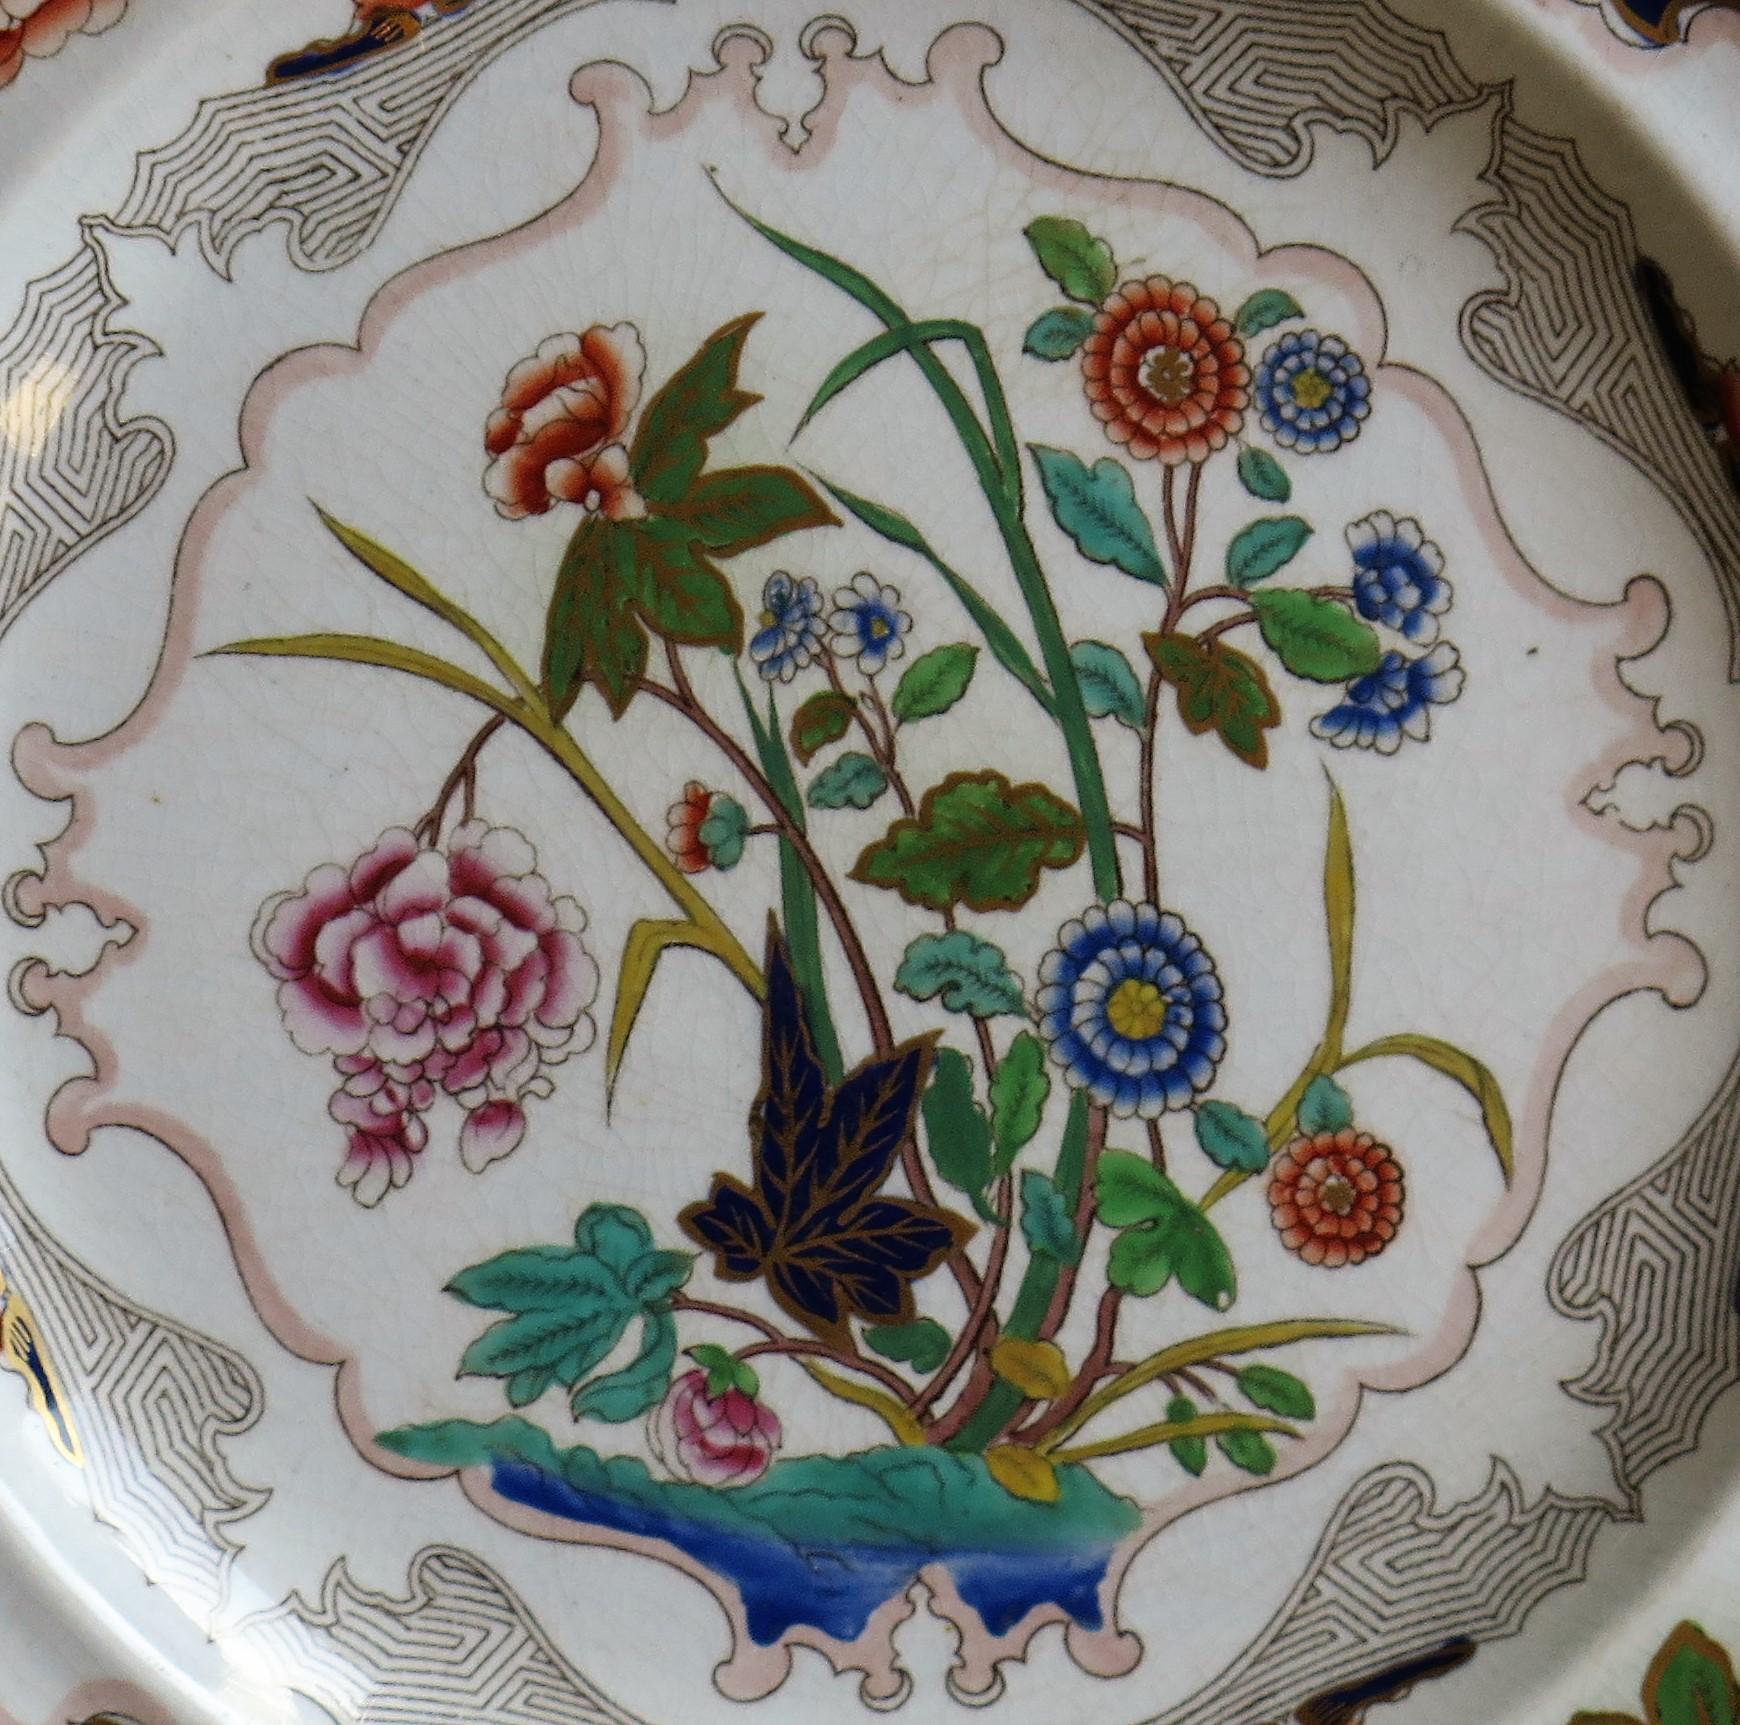 Charles Meigh Ironstone Plate Hand Painted Floral Pattern No. 422, circa 1840 7